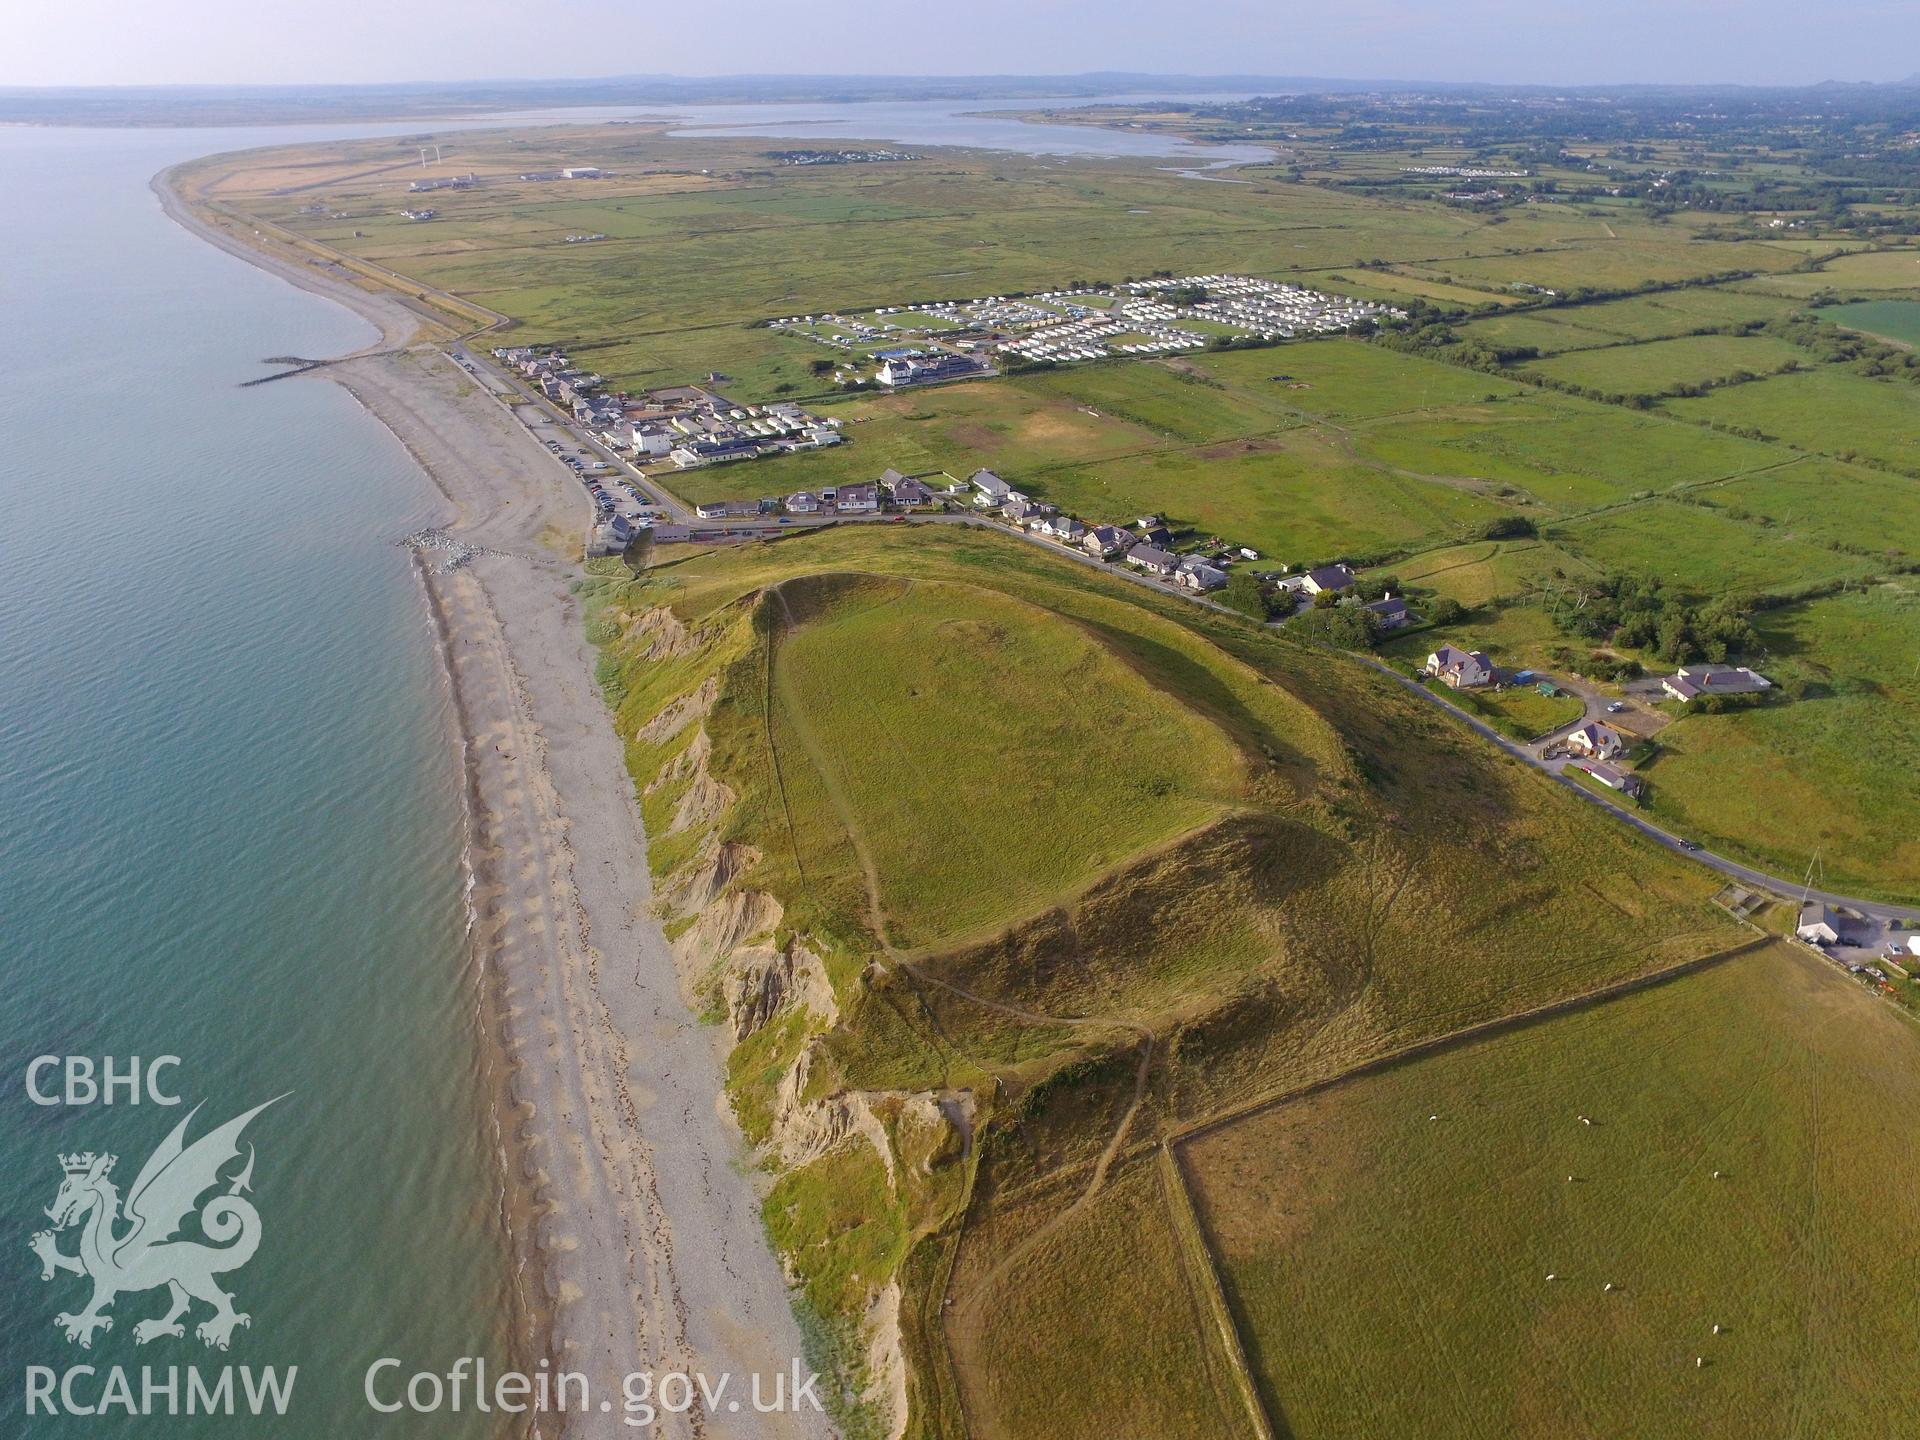 Aerial view of Dinas Dinlle Hillfort, Llandwrog. Colour photograph taken by Paul R. Davis on 23rd June 2018.